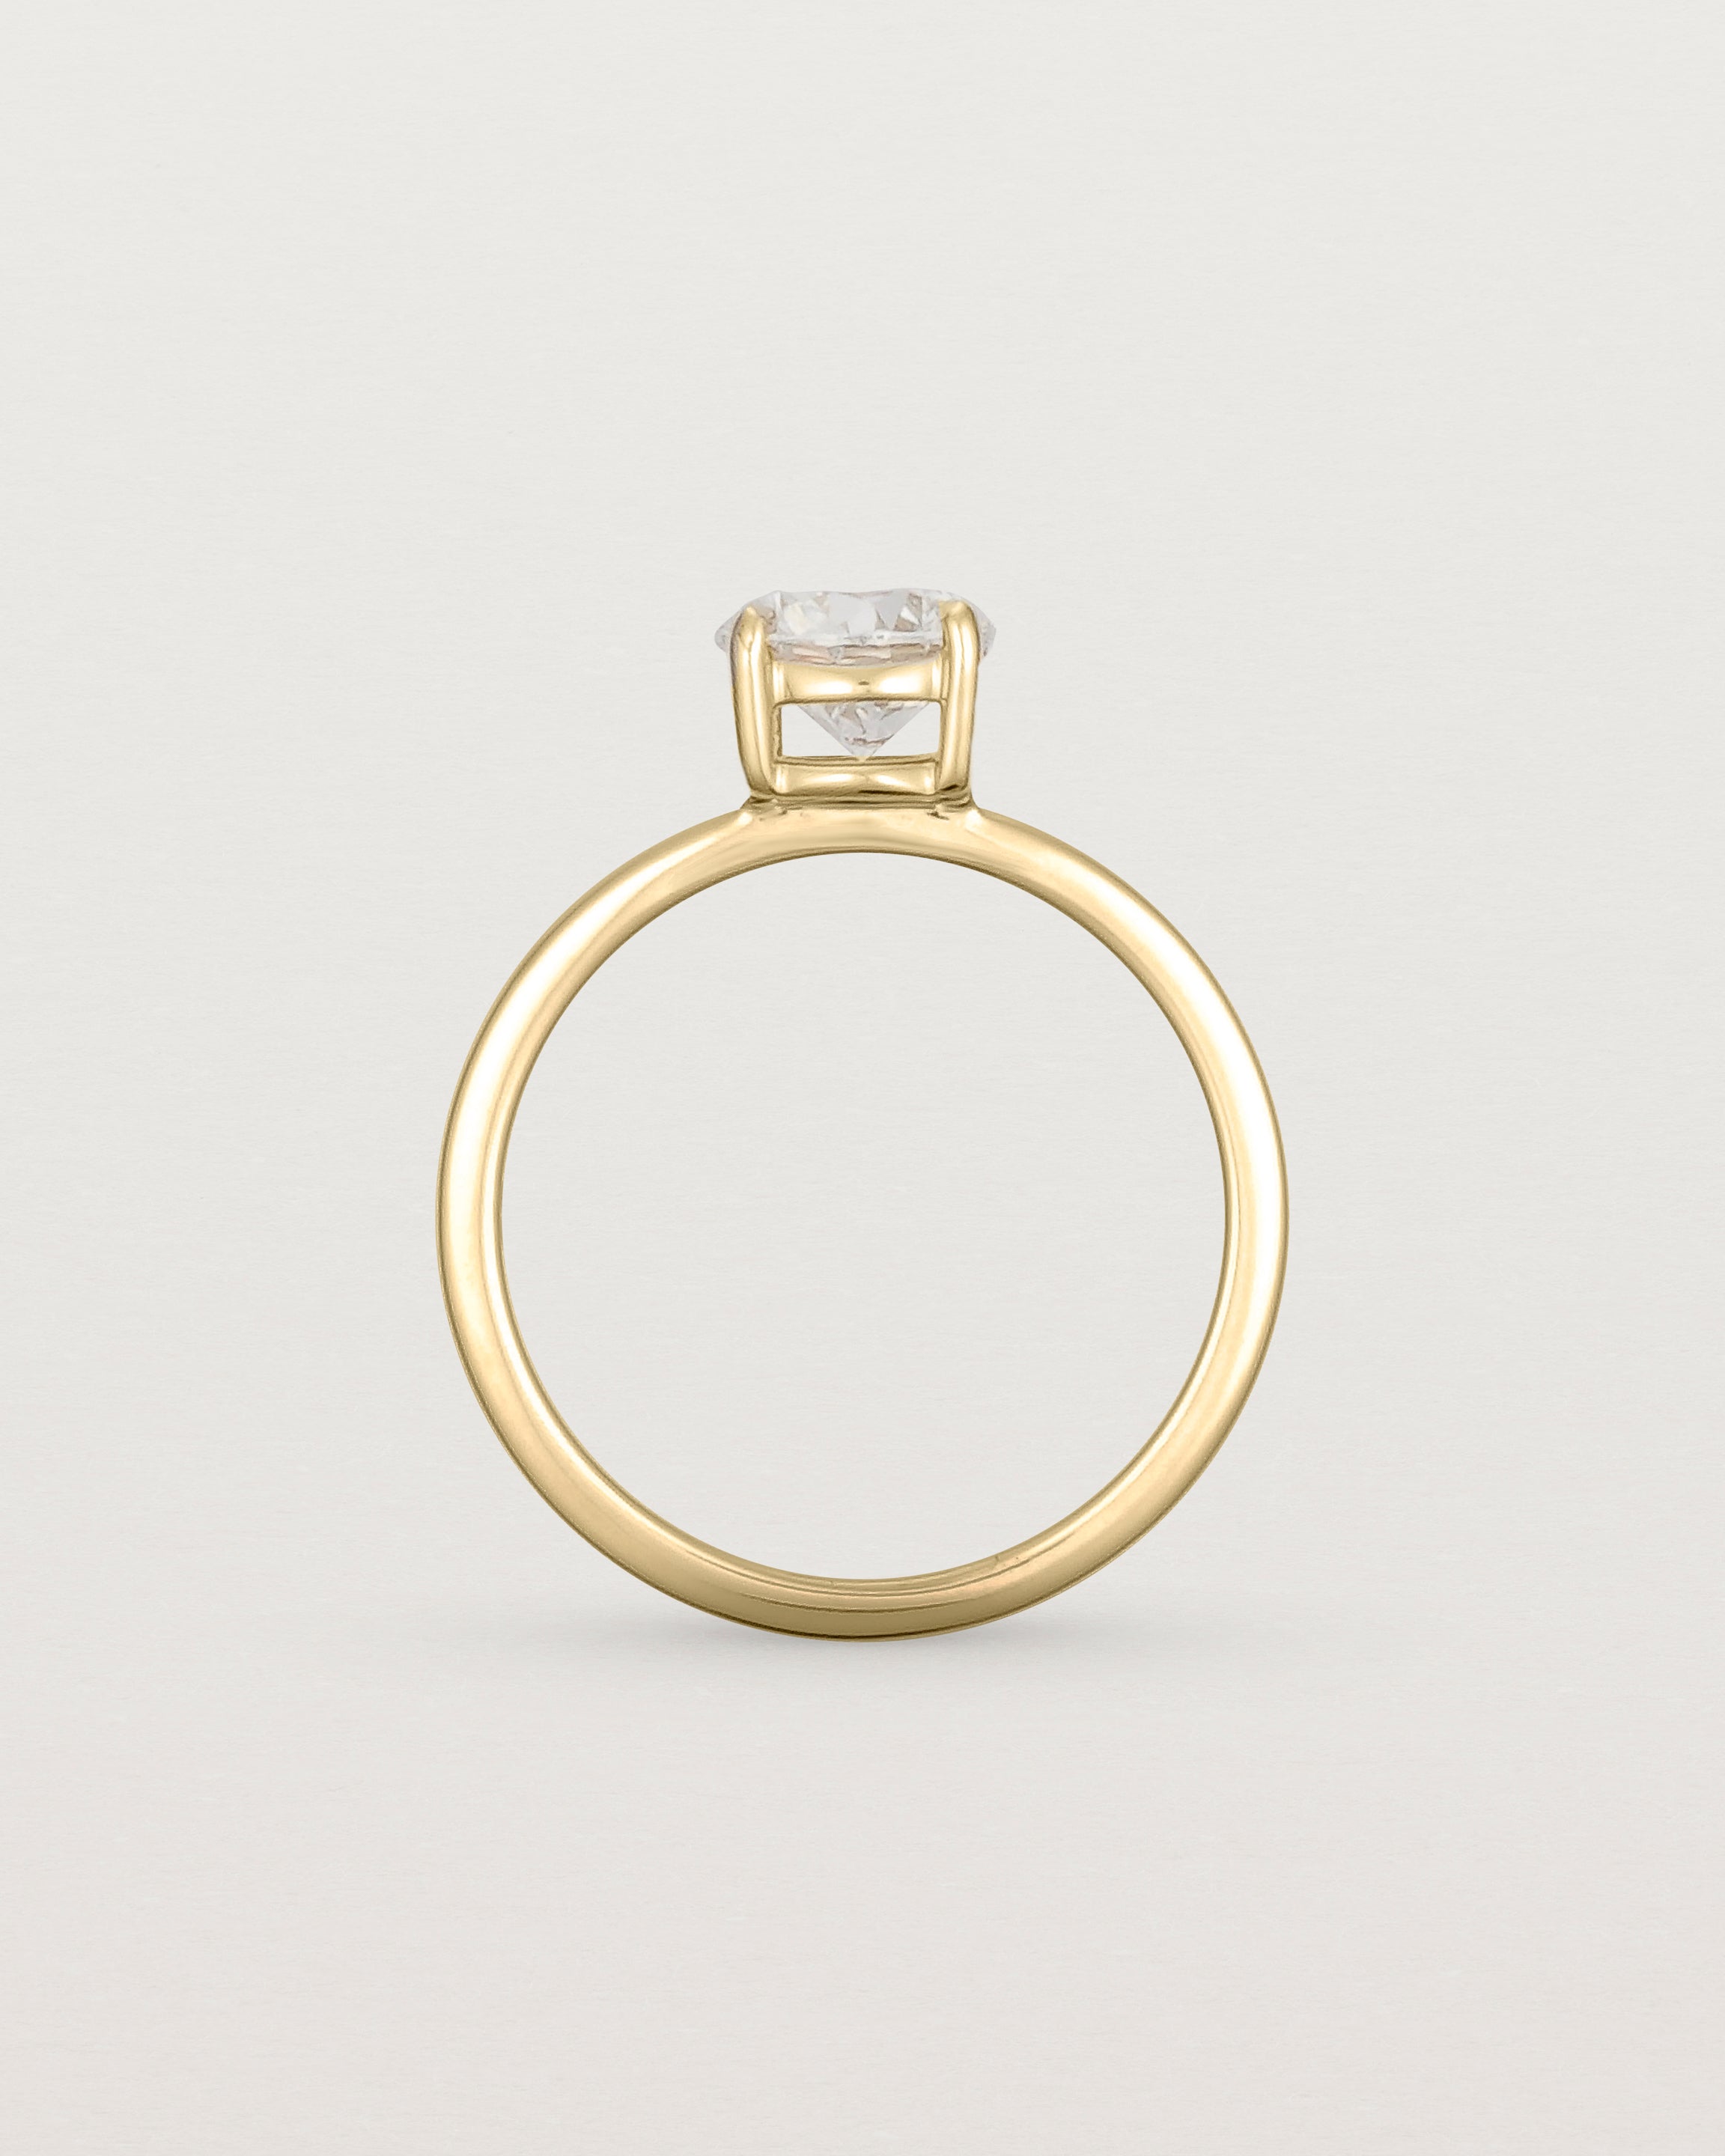 Standing view of the Petite Una Round Solitaire | Laboratory Grown Diamond | Yellow Gold.